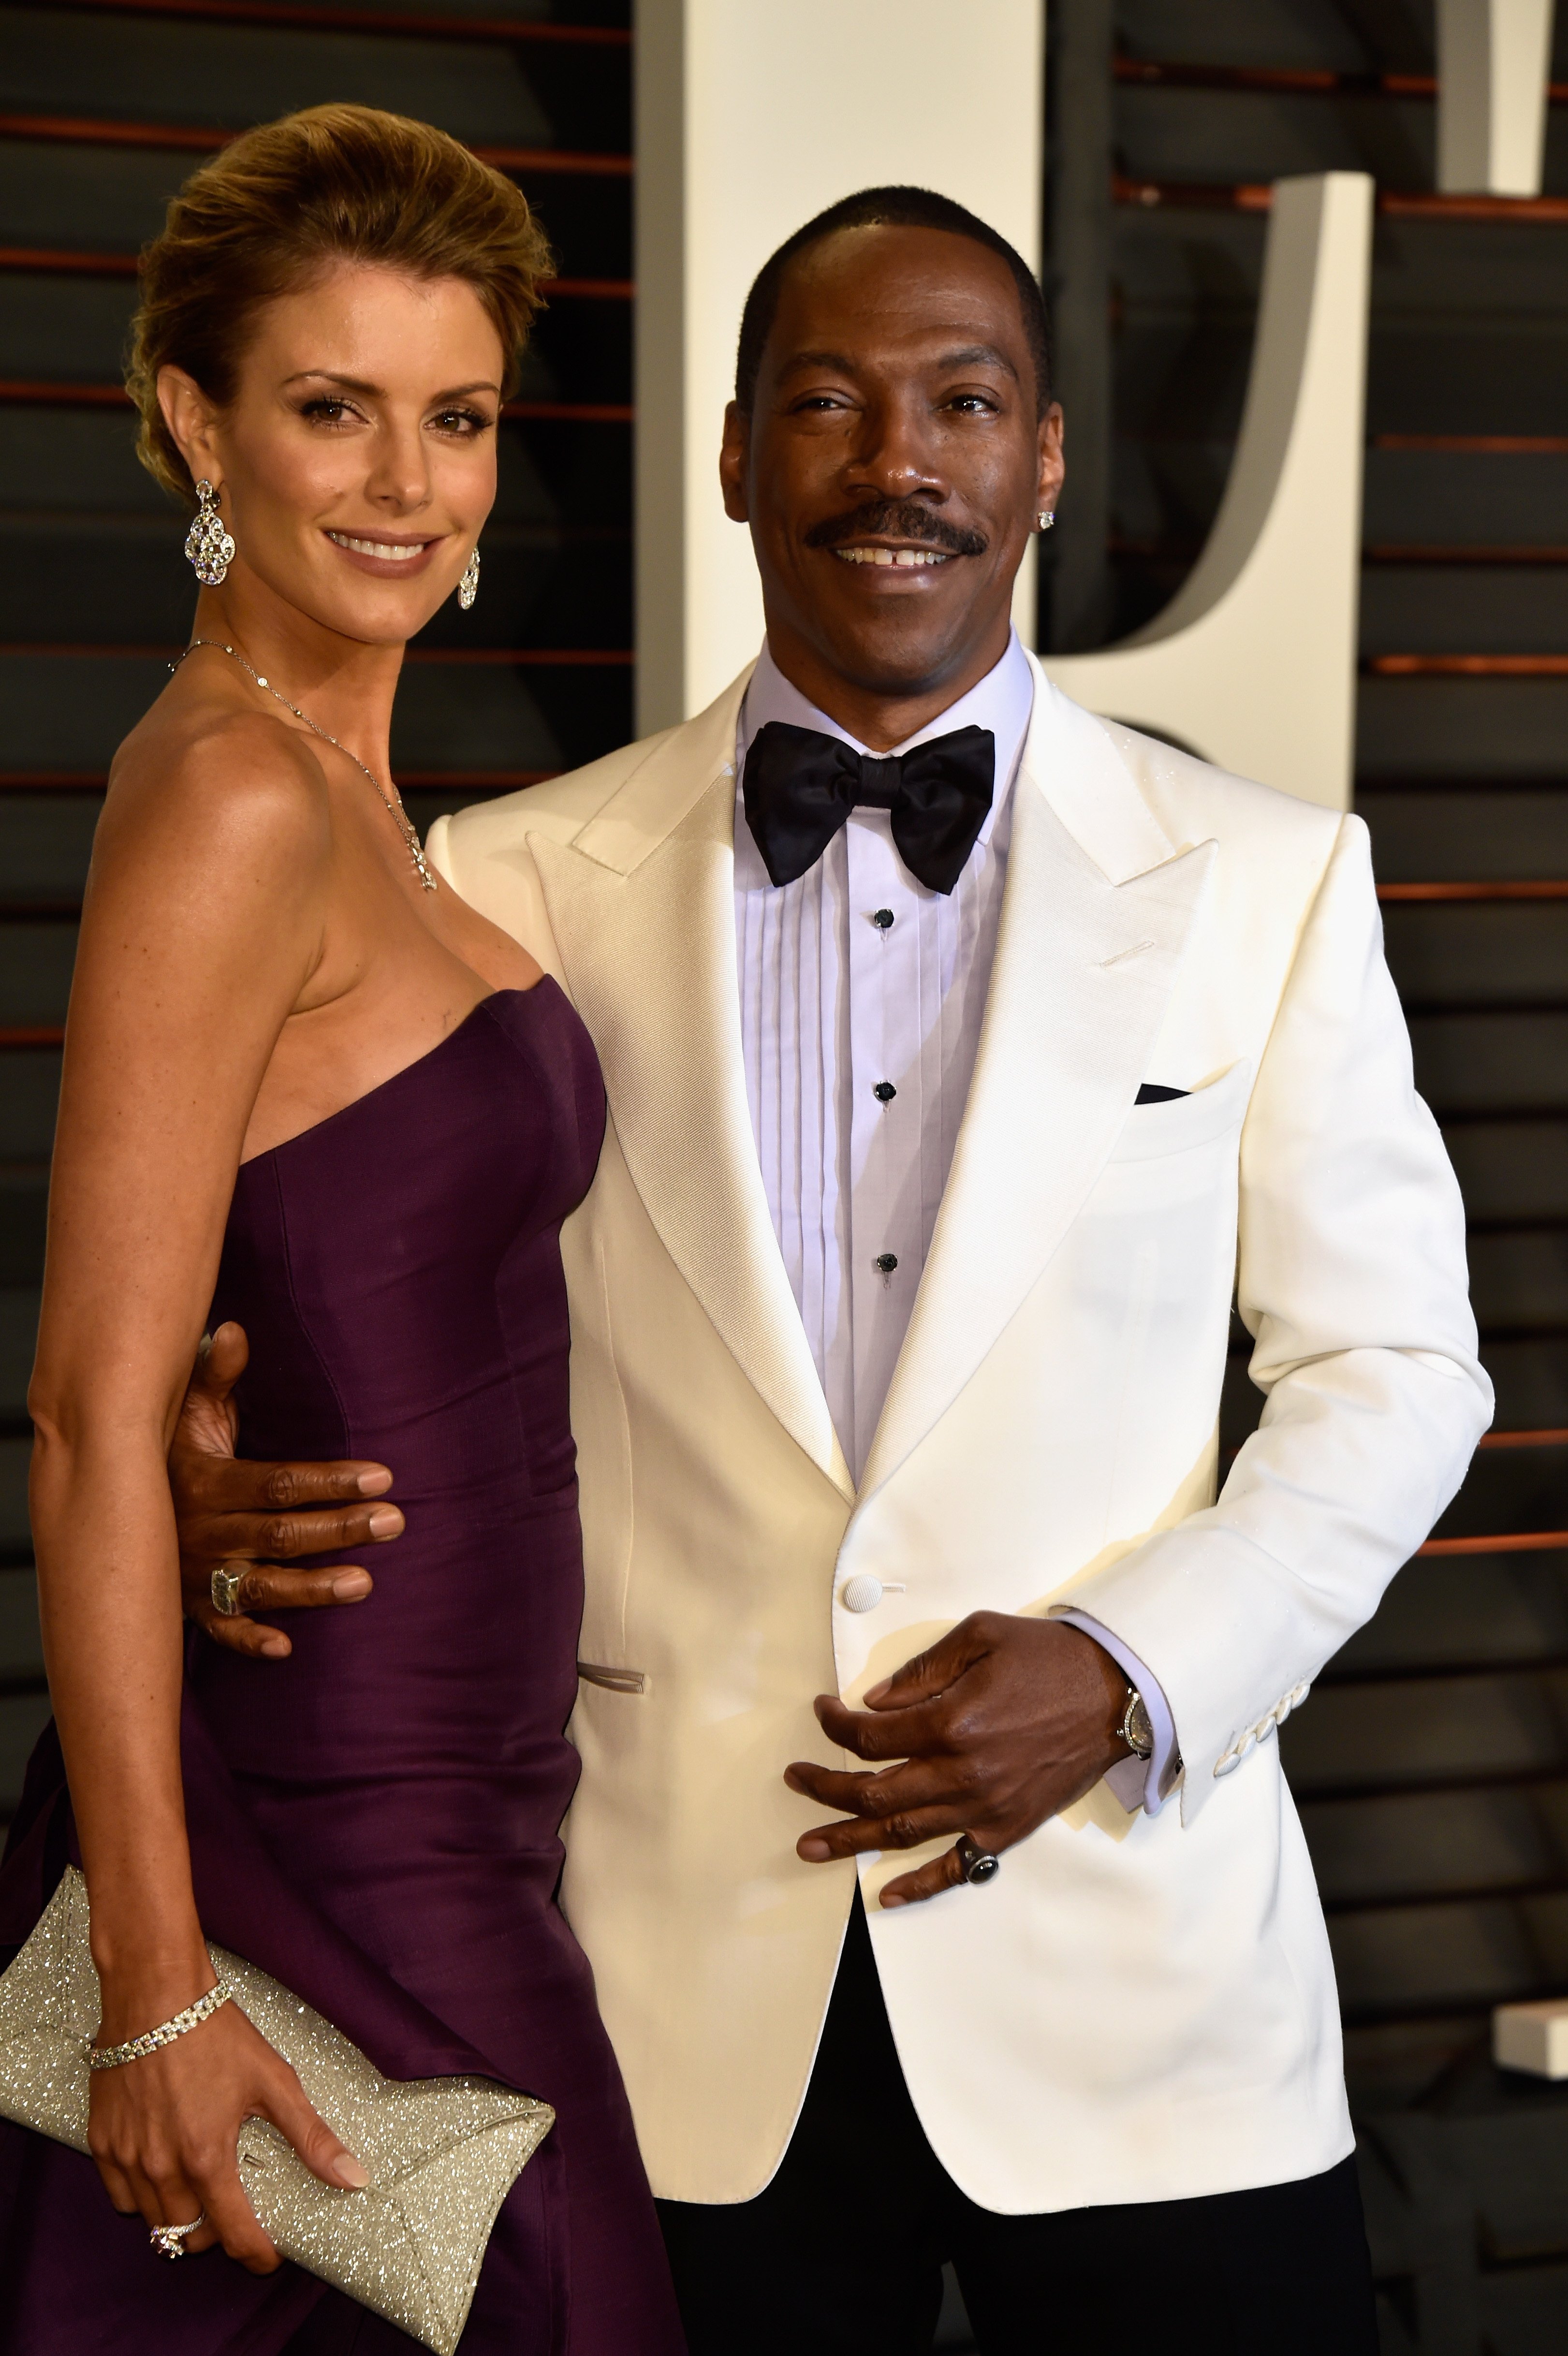 Paige Butcher and actor Eddie Murphy attend the 2015 Vanity Fair Oscar Party hosted by Graydon Carter | Photo: Getty Images